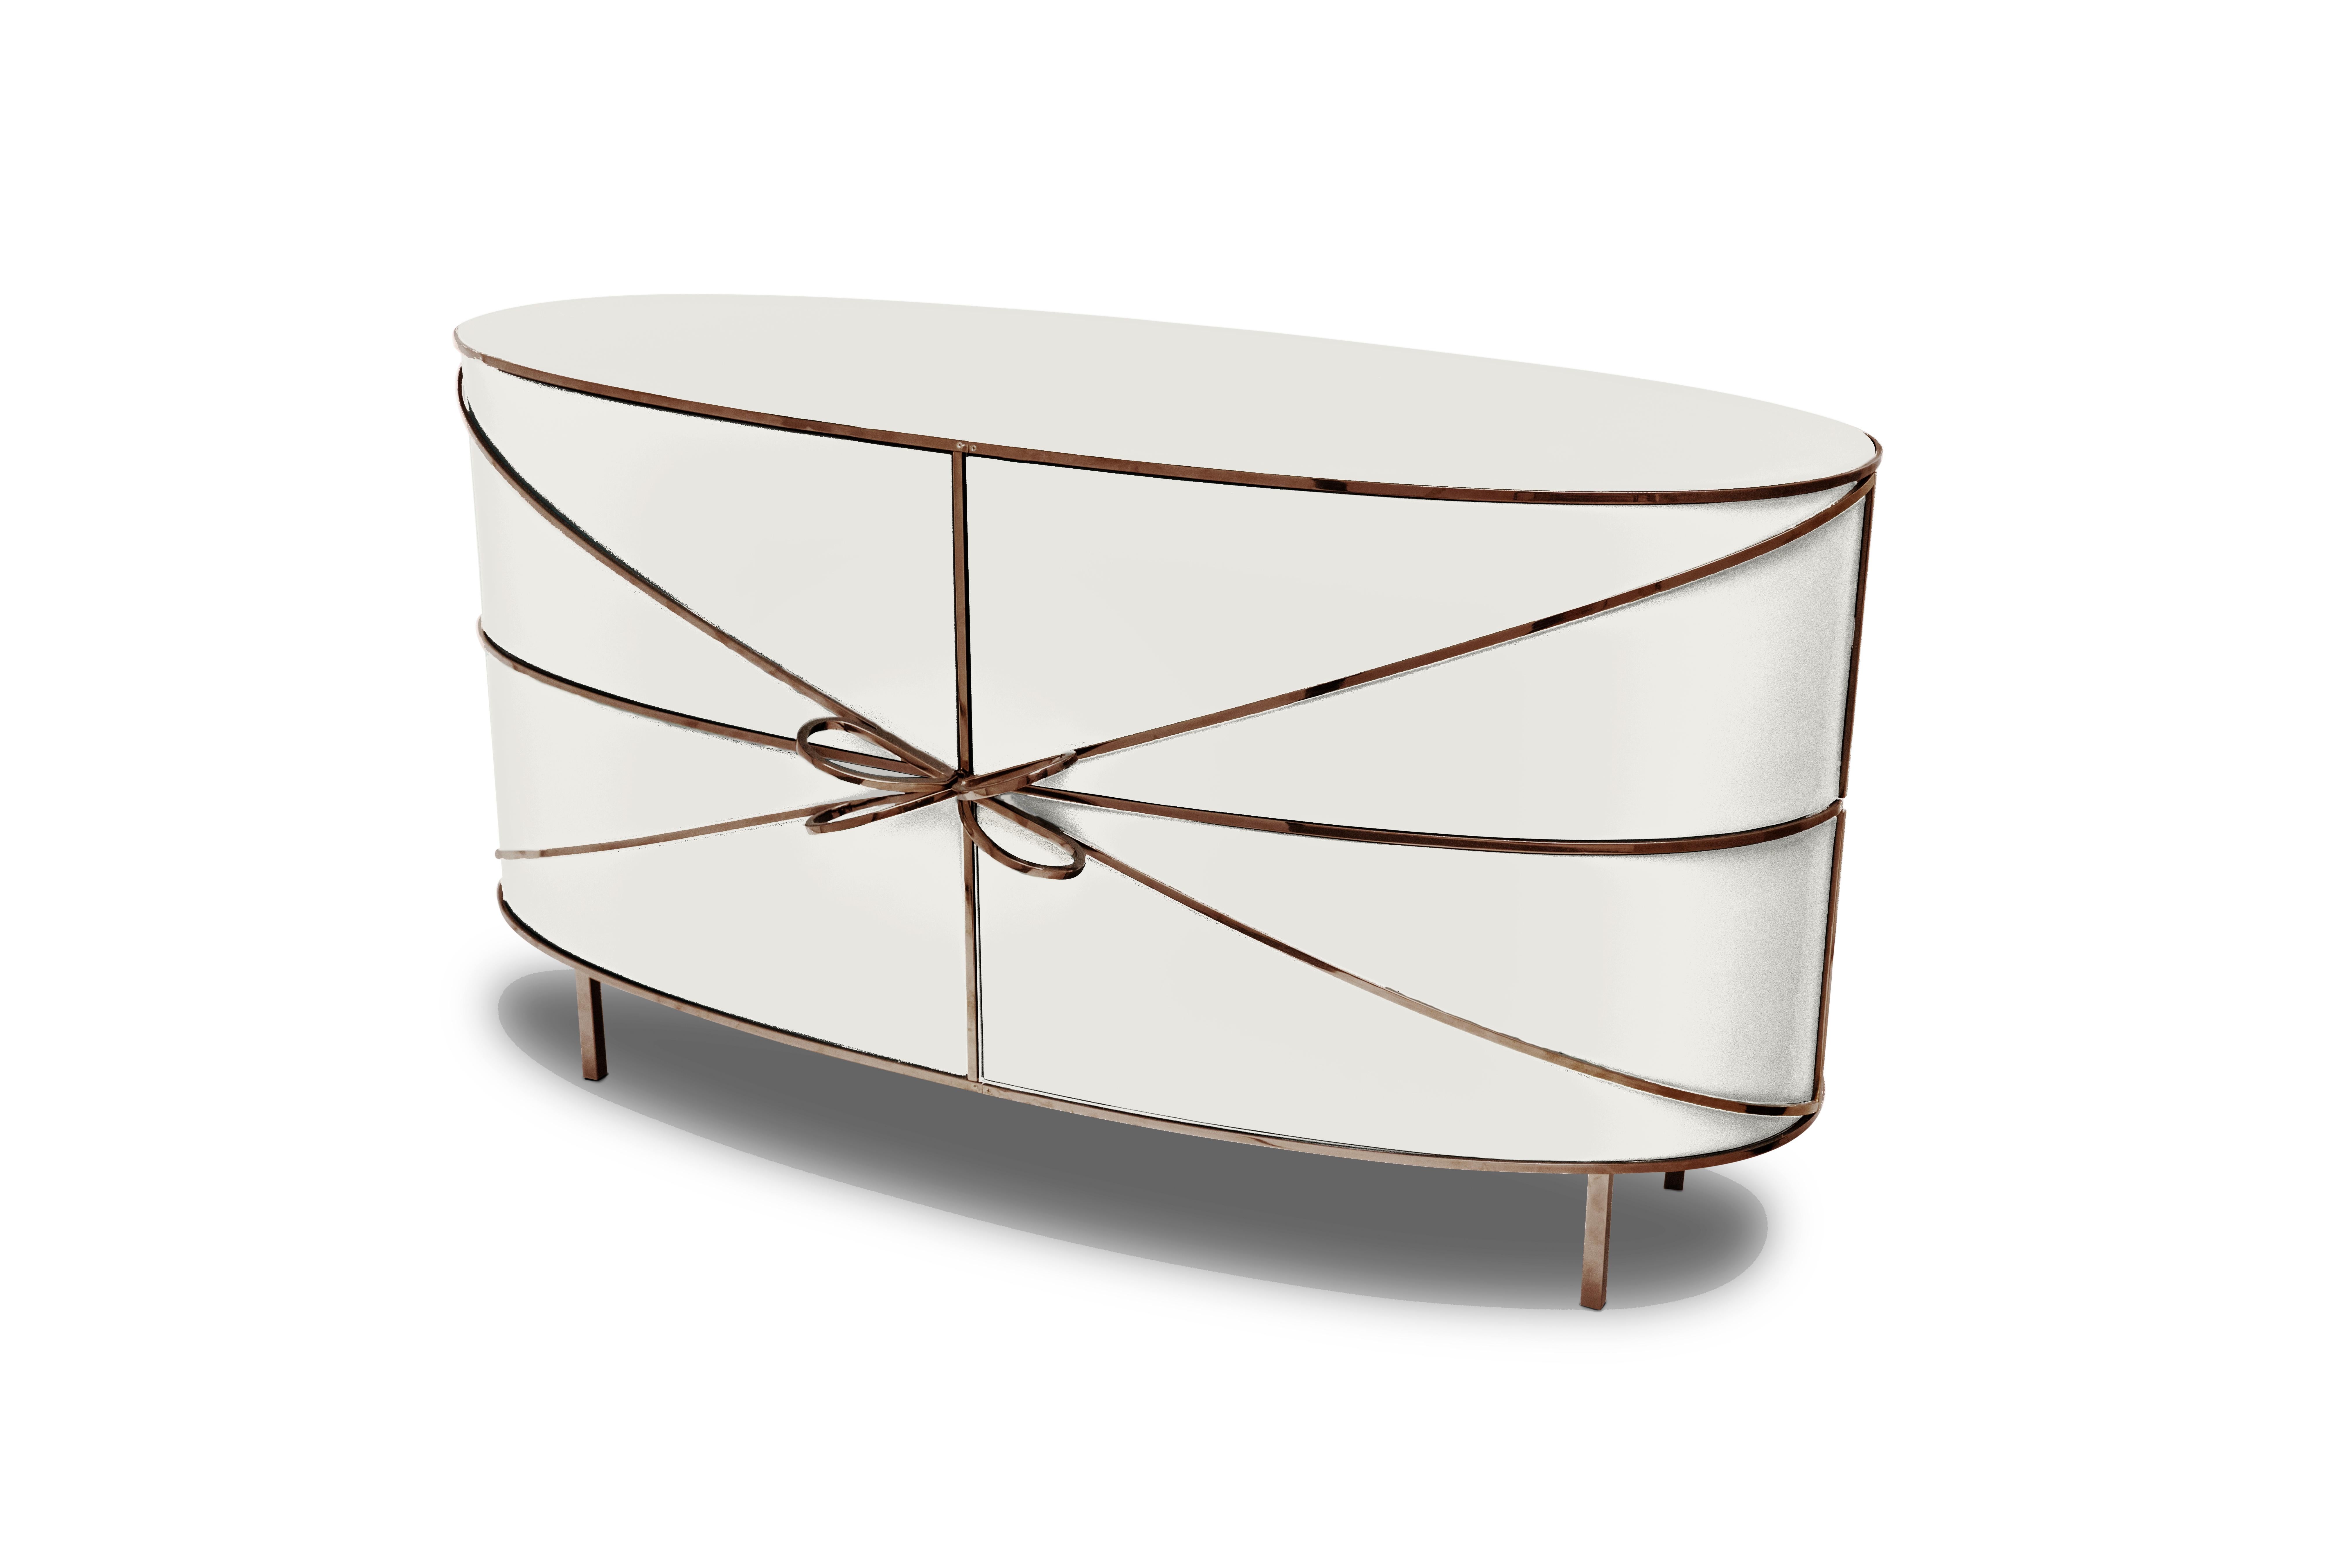 88 Secrets White Sideboard with Rose Gold Trims by Nika Zupanc is a pristine white cabinet in sensuous, feminine lines with luxurious rose metal trims. A statement piece in any interior space!

Nika Zupanc, a strikingly renowned Slovenian designer,